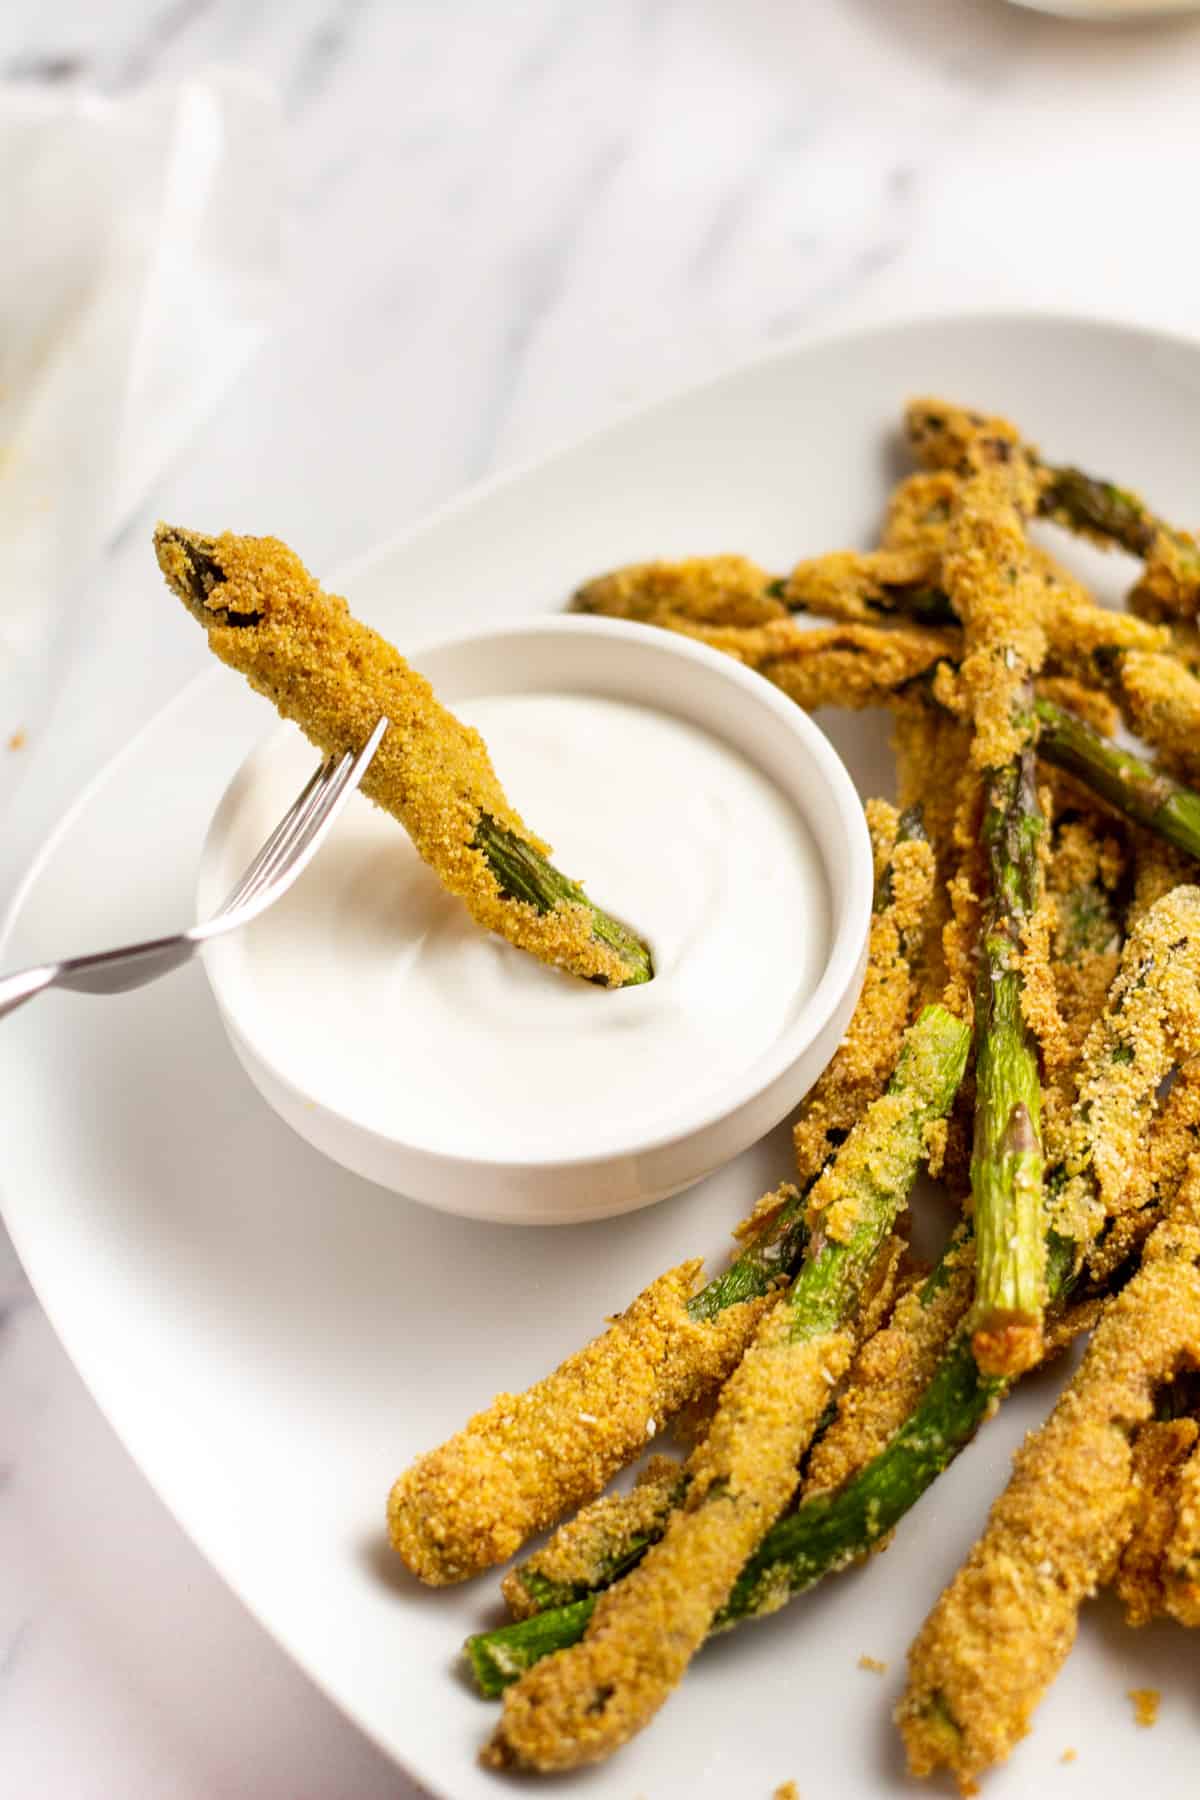 a fried asparagus stick being dipped into a white creamy sauce